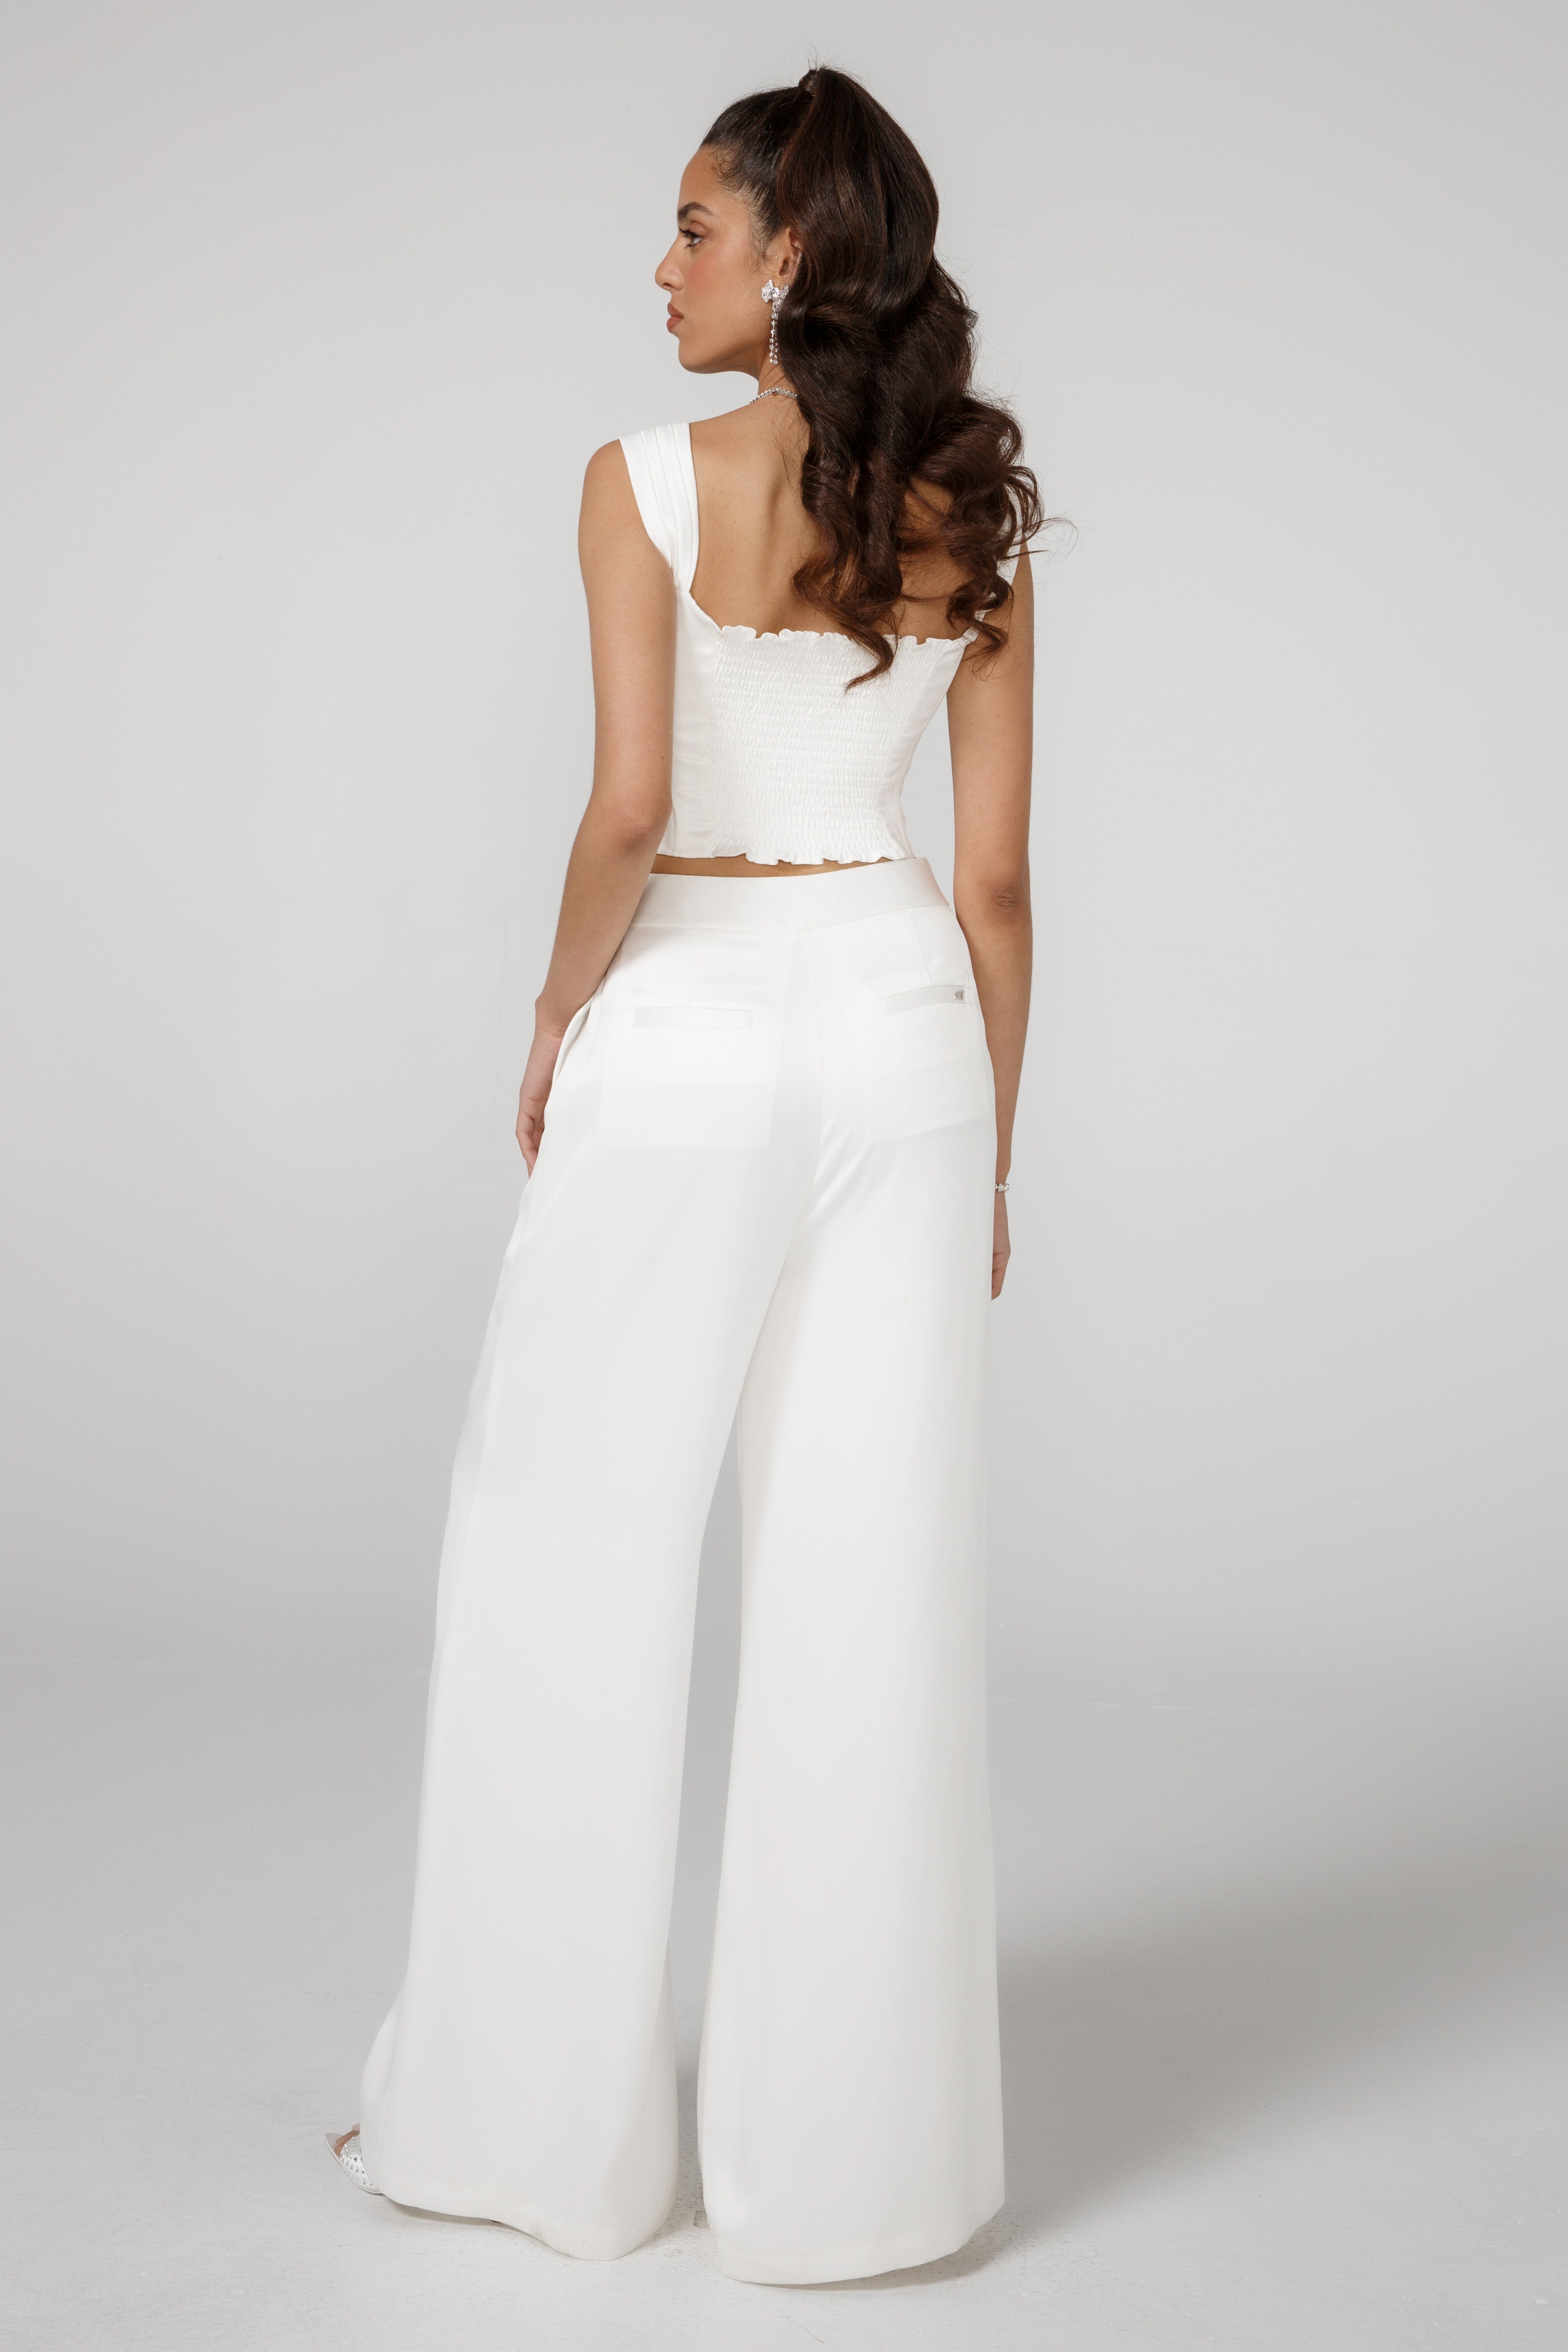 Kukombo White Satin Women Pants Set Autumn Flare Sleeve Backless Blouses  Tops Two Piece Pants Set Fashion Wide Leg Trousers Suit | Fashion, Wedding  guest outfit fall, Outfits